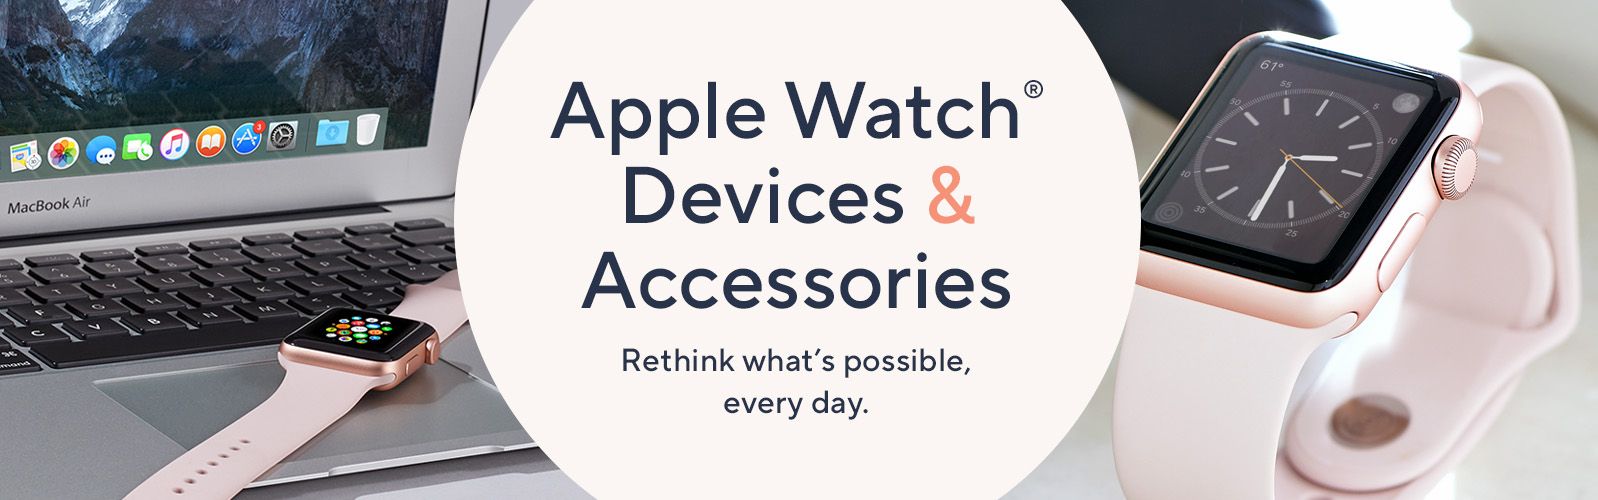 Apple Watch Series 7 45mm GPS Smartwatch with Accessories 